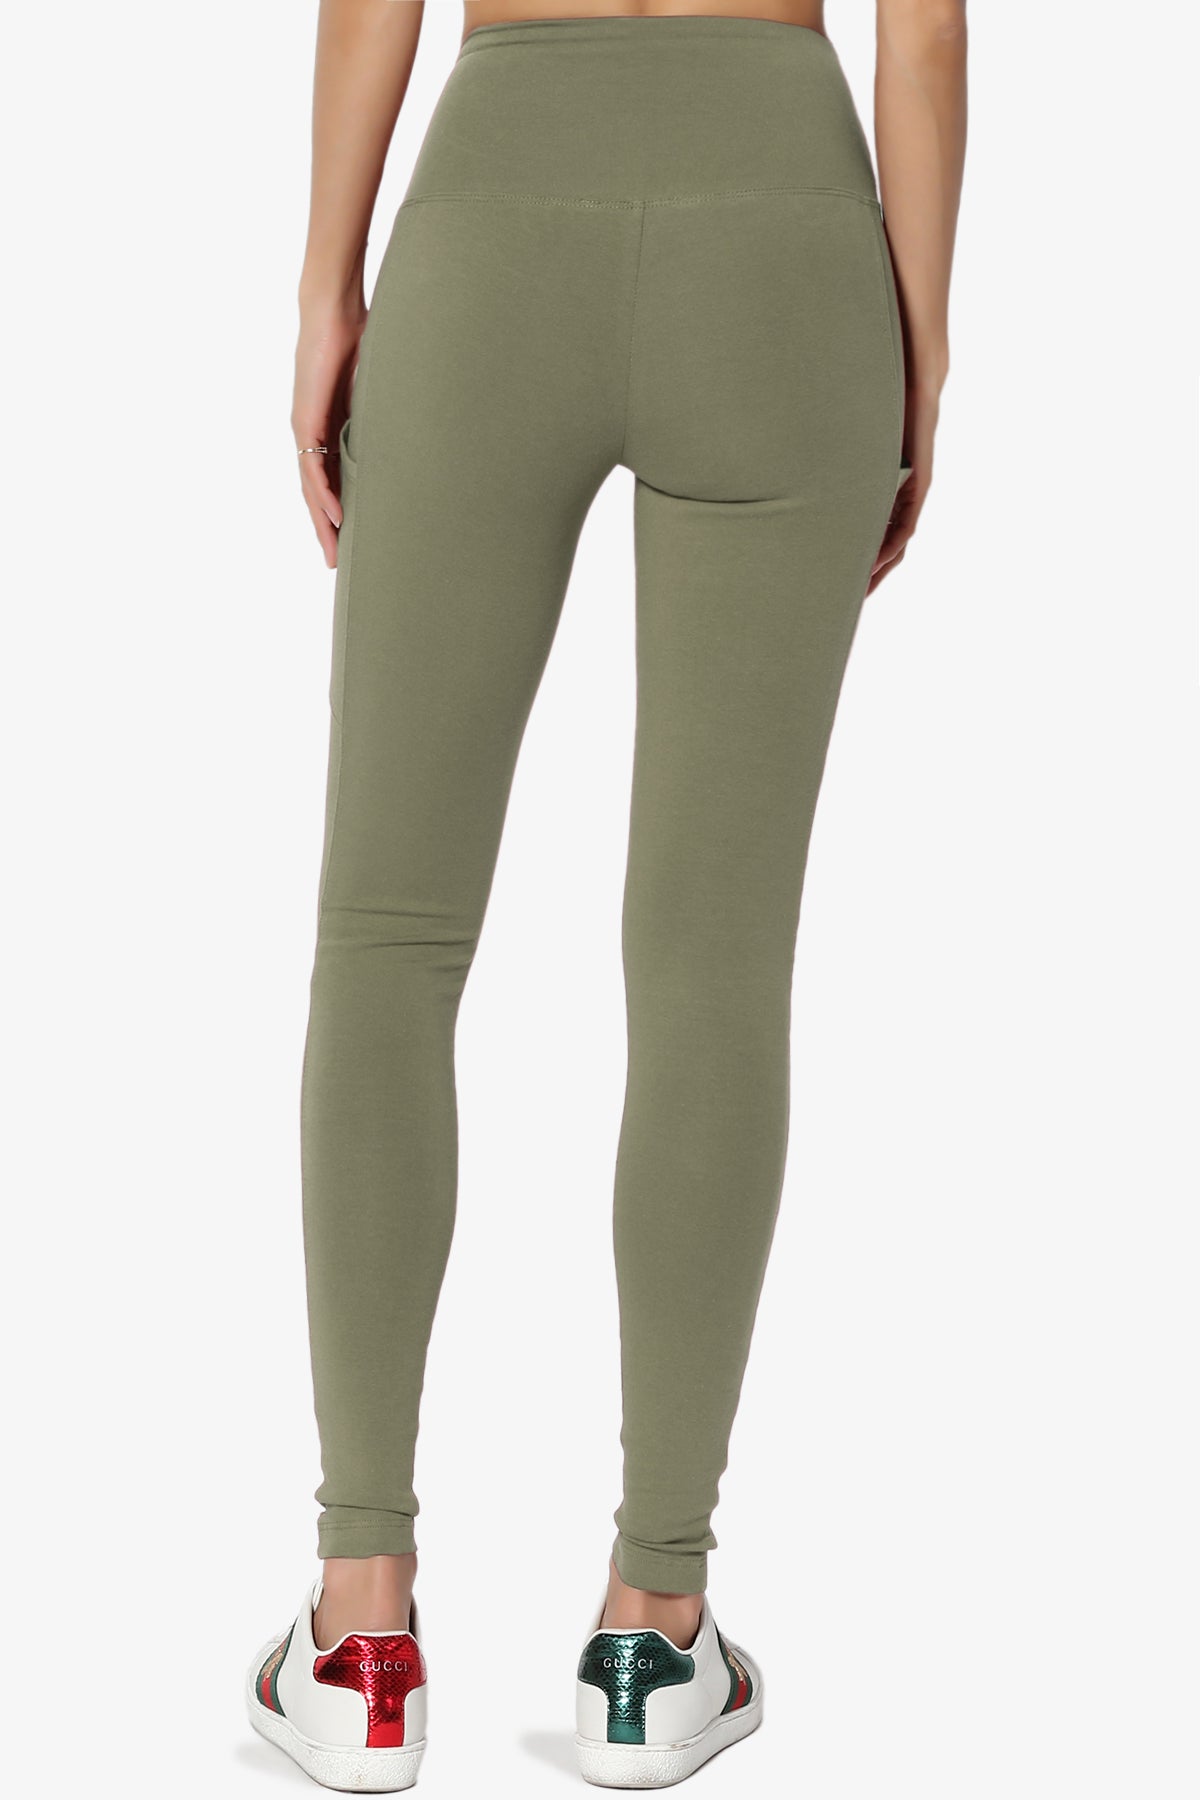 Ansley Luxe Cotton Leggings with Pockets DUSTY OLIVE_2